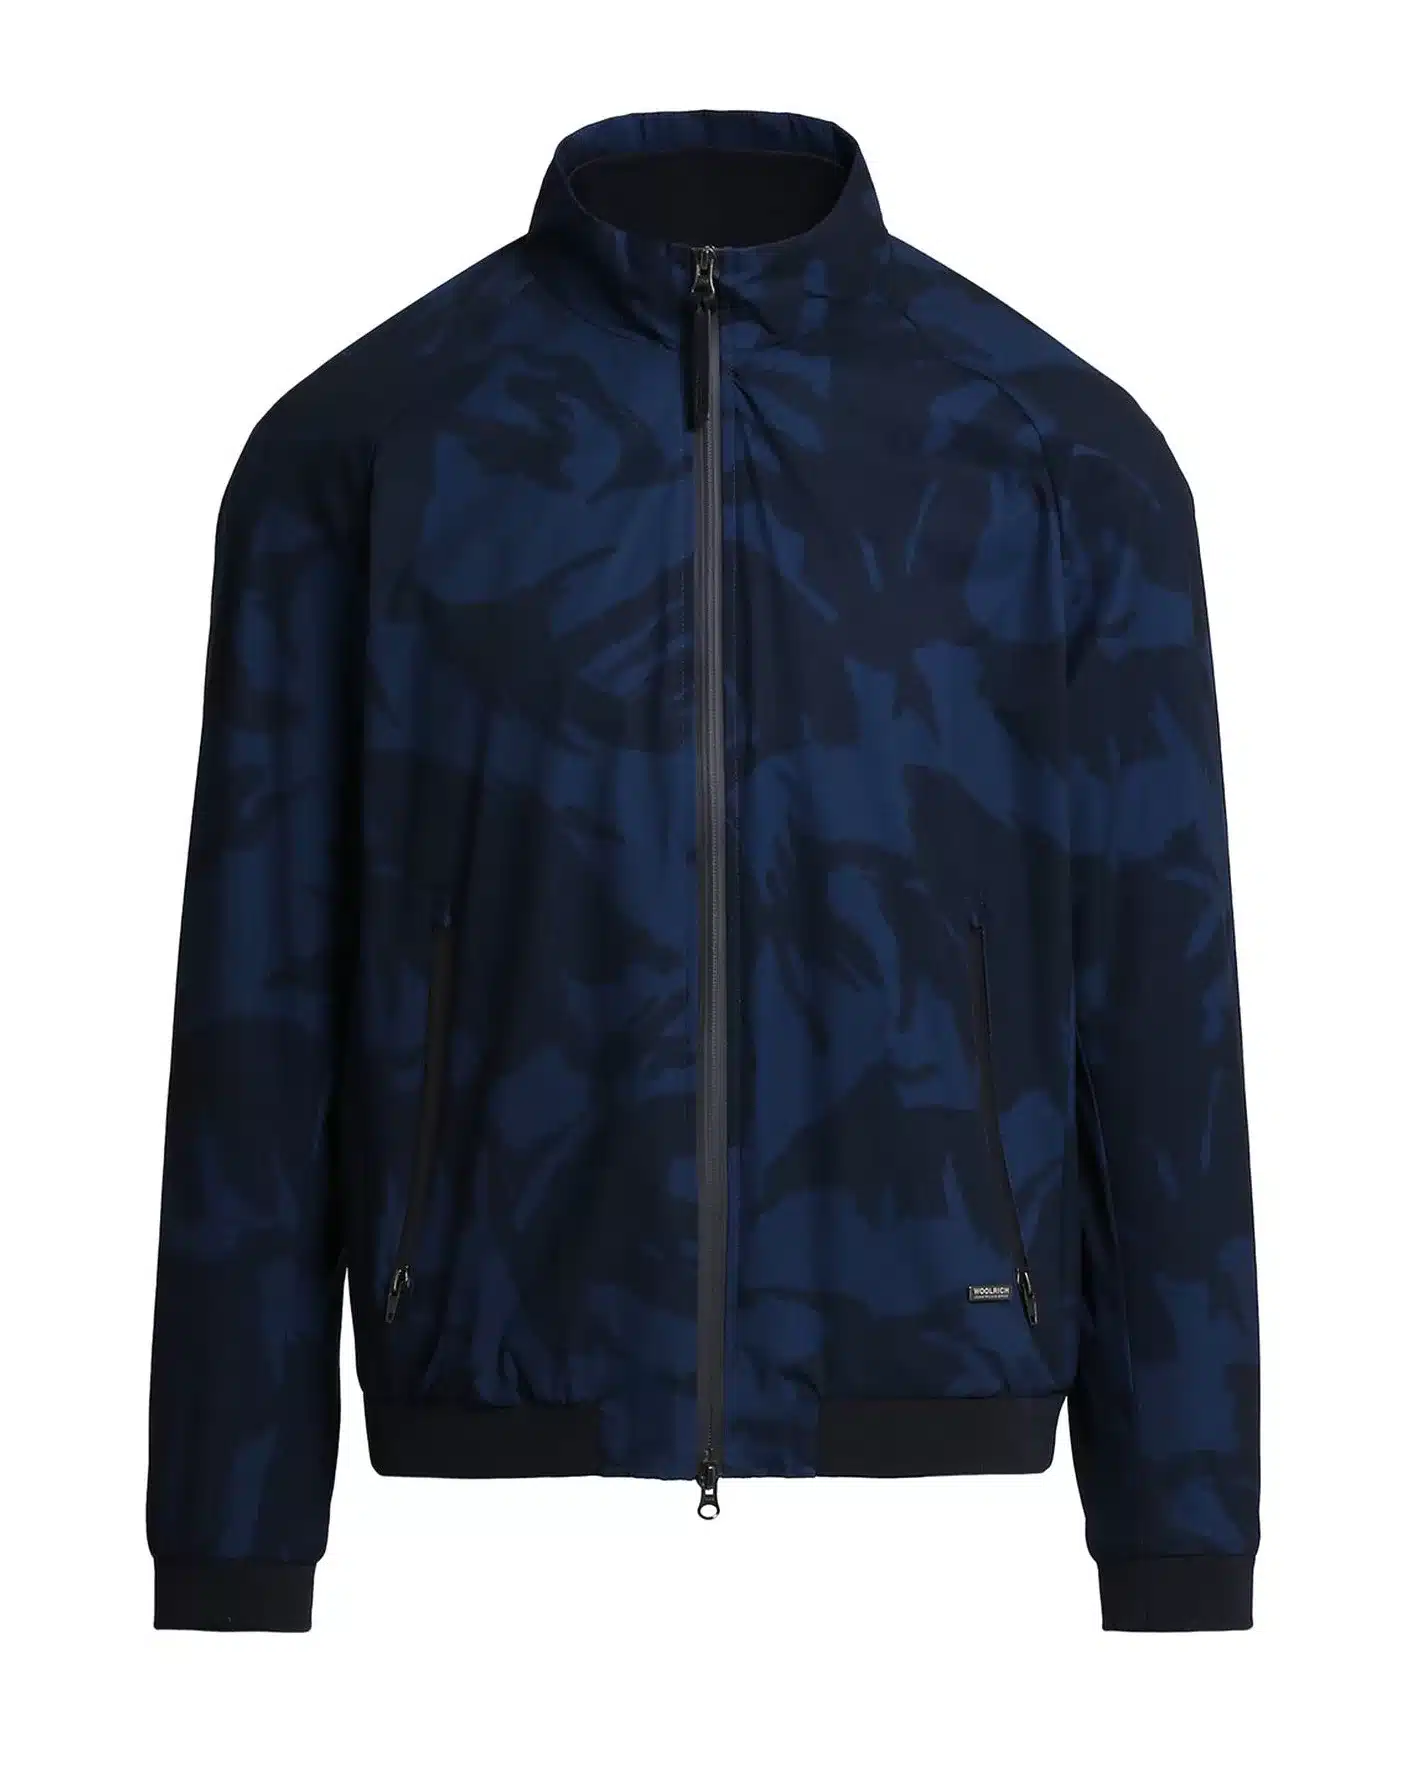 WOOLRICH – SOUTHBAY BOMBER